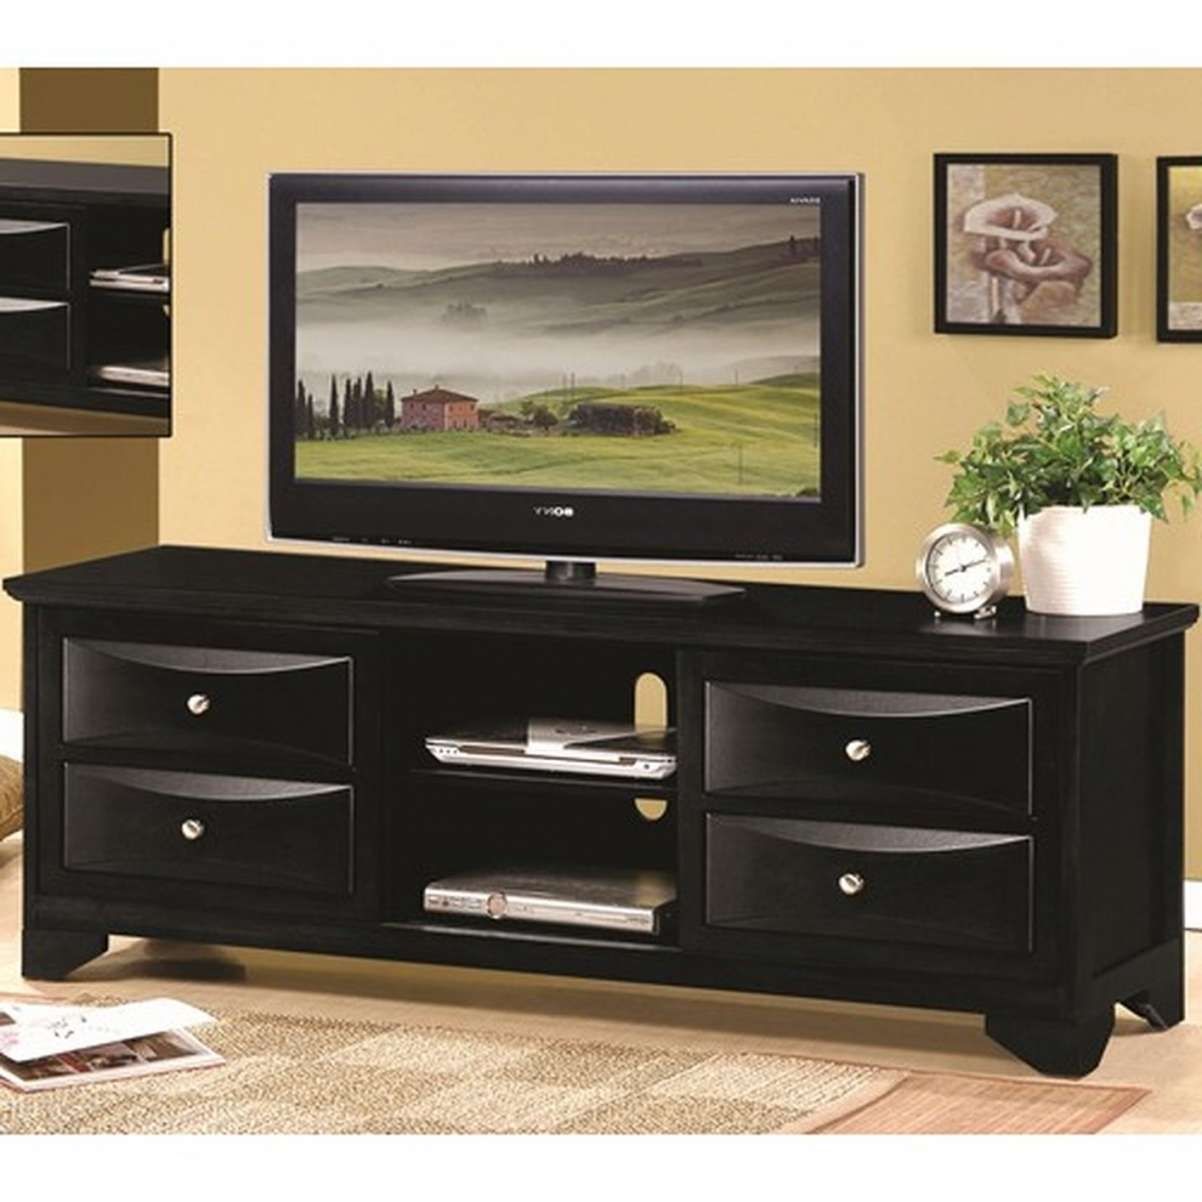 Luxury Tv Stands Big Lots Fresh – Best Furniture Gallery With Regard To Luxury Tv Stands (View 12 of 15)